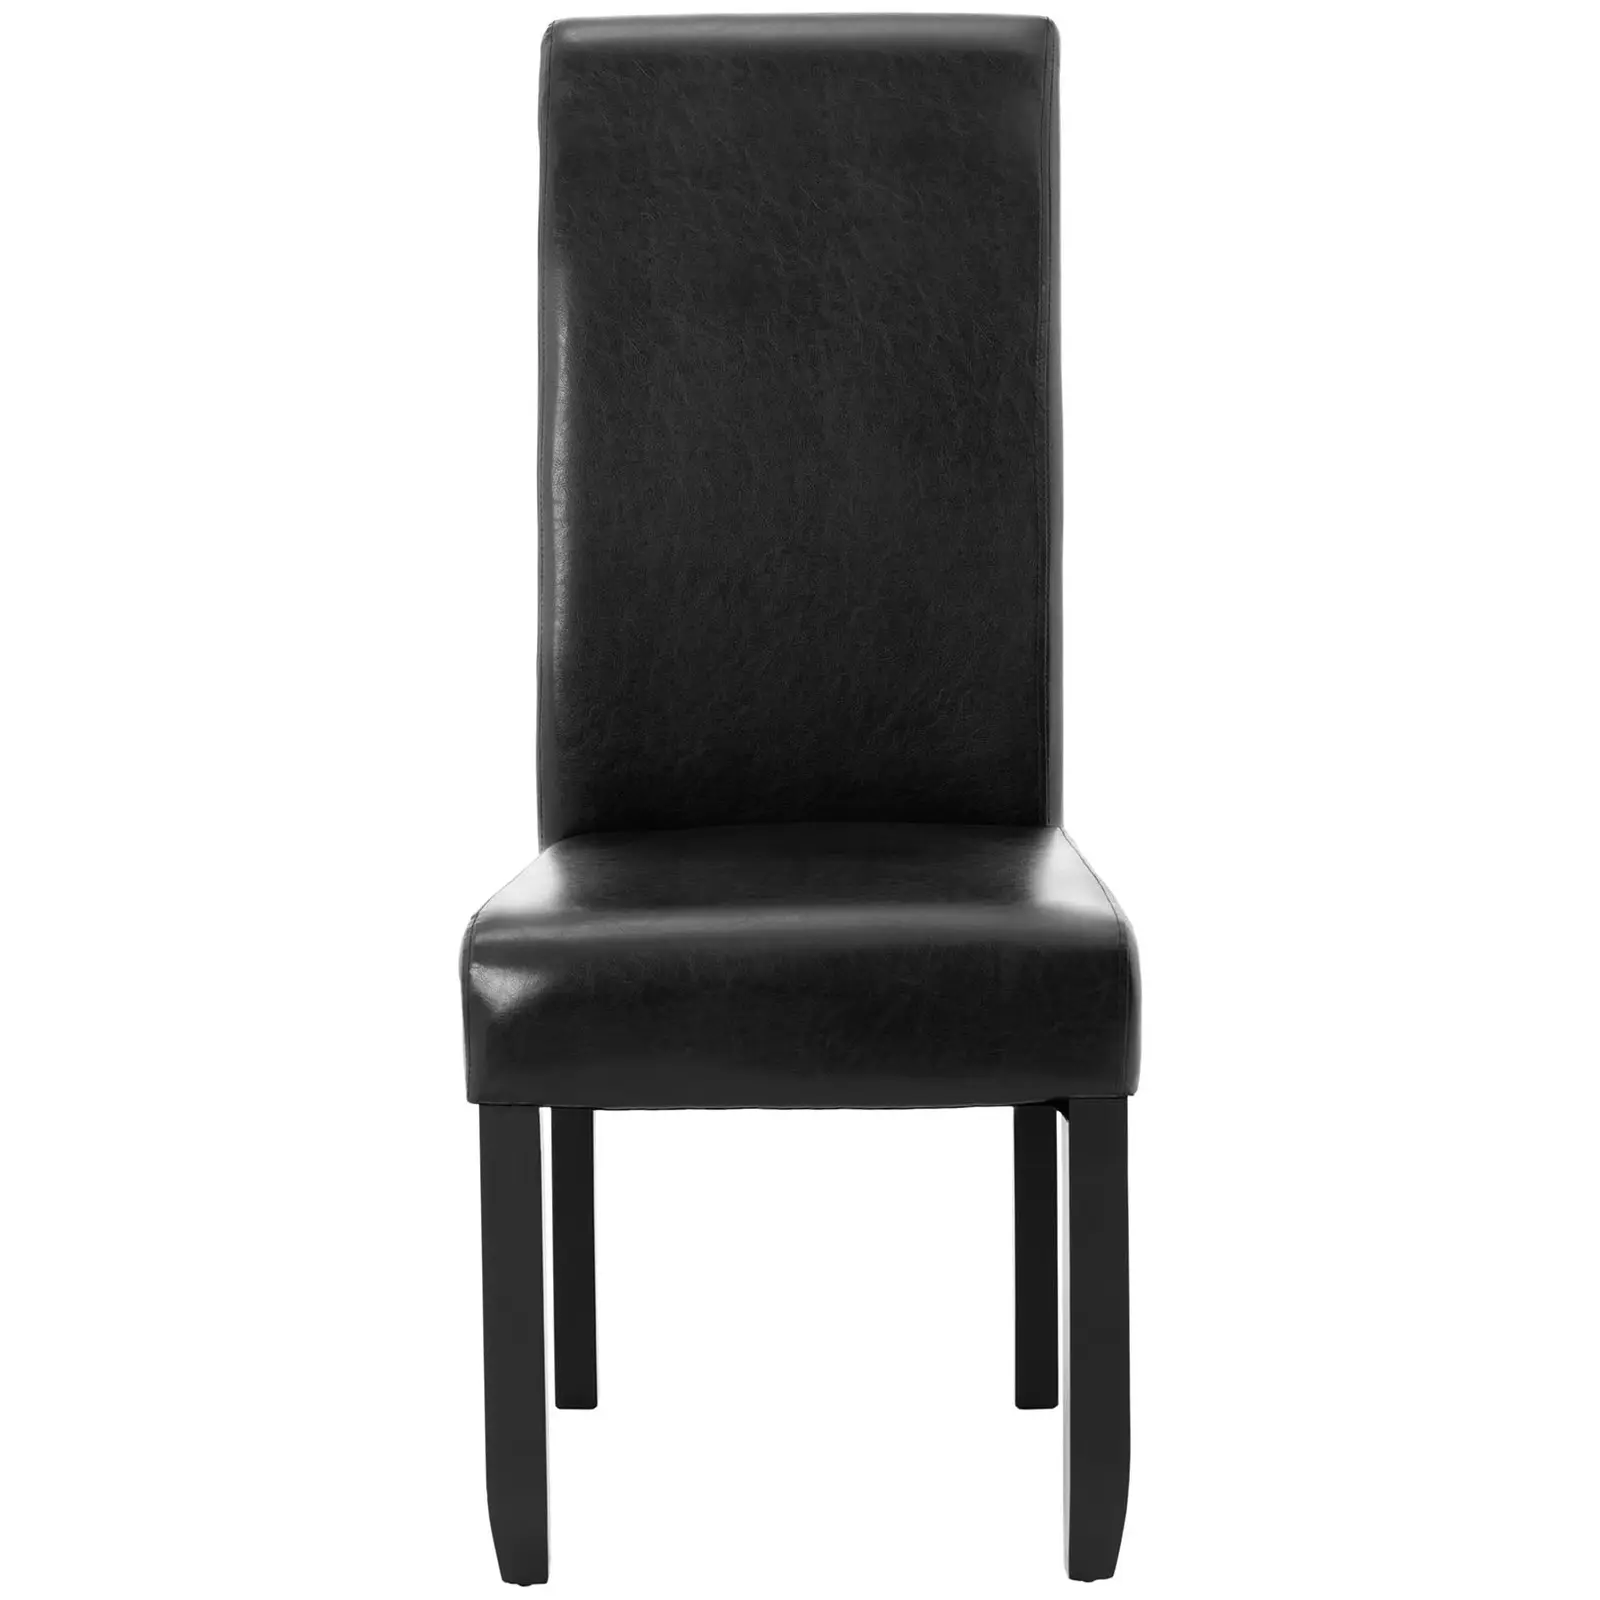 Upholstered Chair - set of 2 - up to 180 kg - seat 44.5 x 44 cm - black